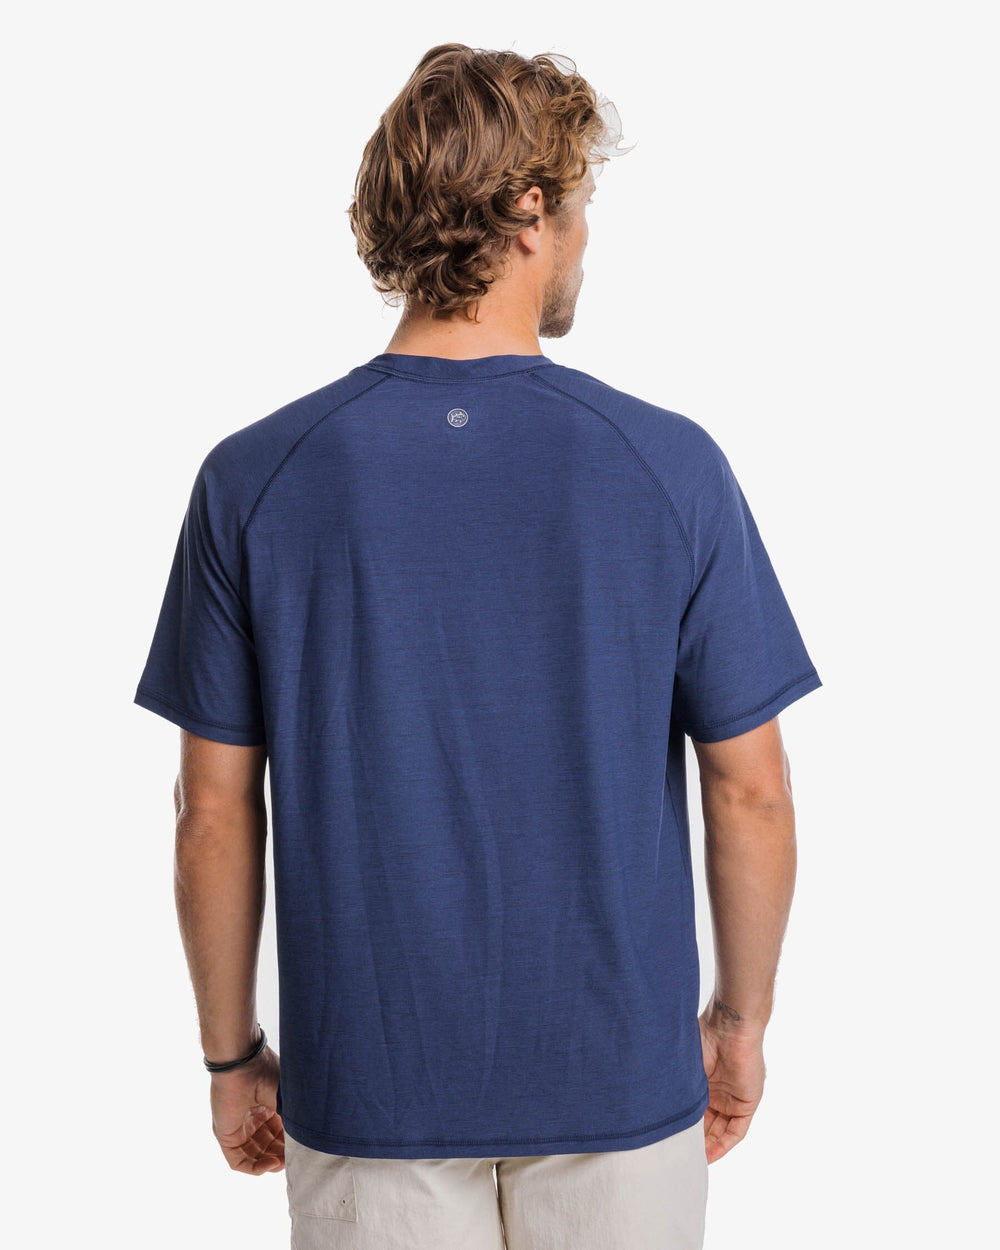 The back view of the Southern Tide brrr°®-illiant Performance Tee by Southern Tide - Nautical Navy